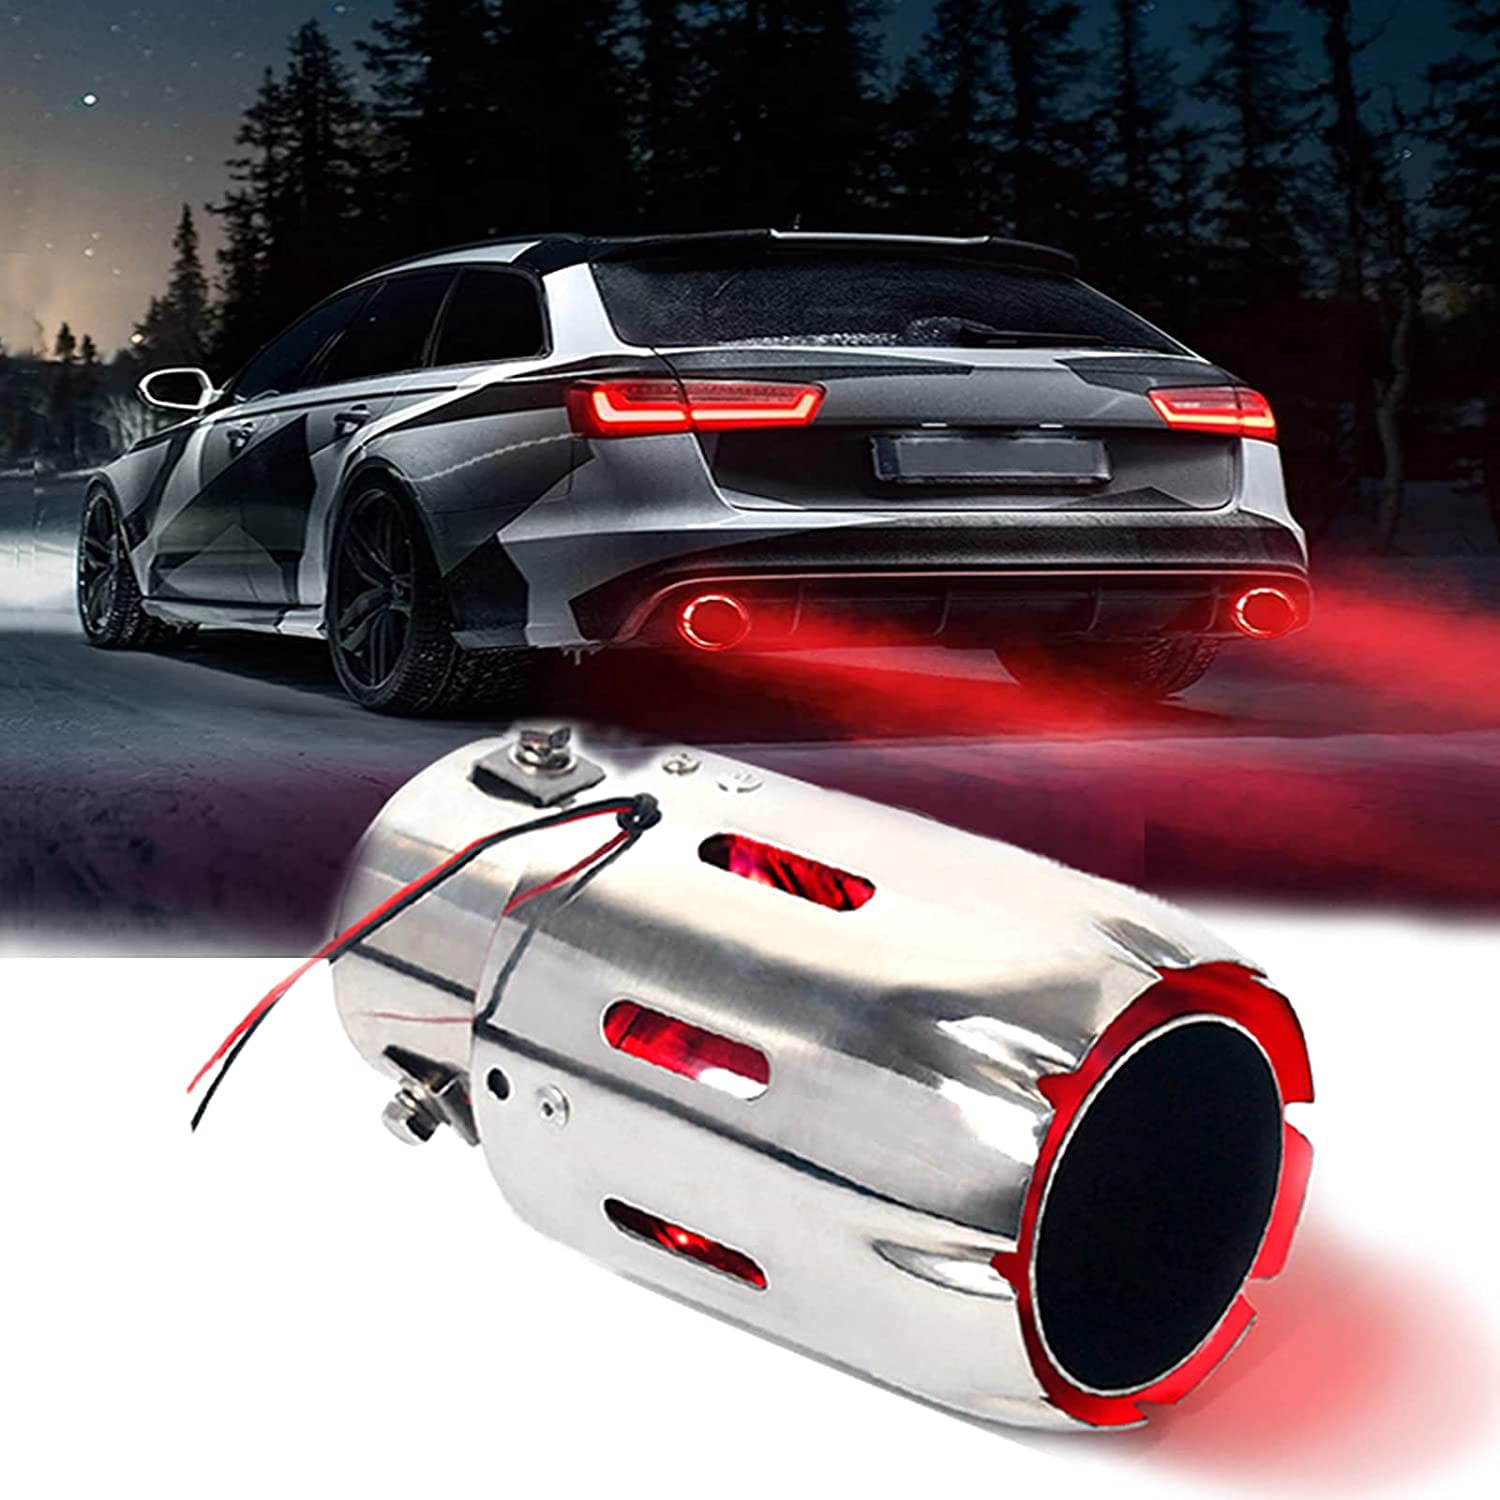 2.5 Inlet Exhaust Tips Stainless Steel Muffler Car Exhaust Tail Pipe Modification Luminous Tube With Red Flame LED light 89mm Outlet 3.5in 